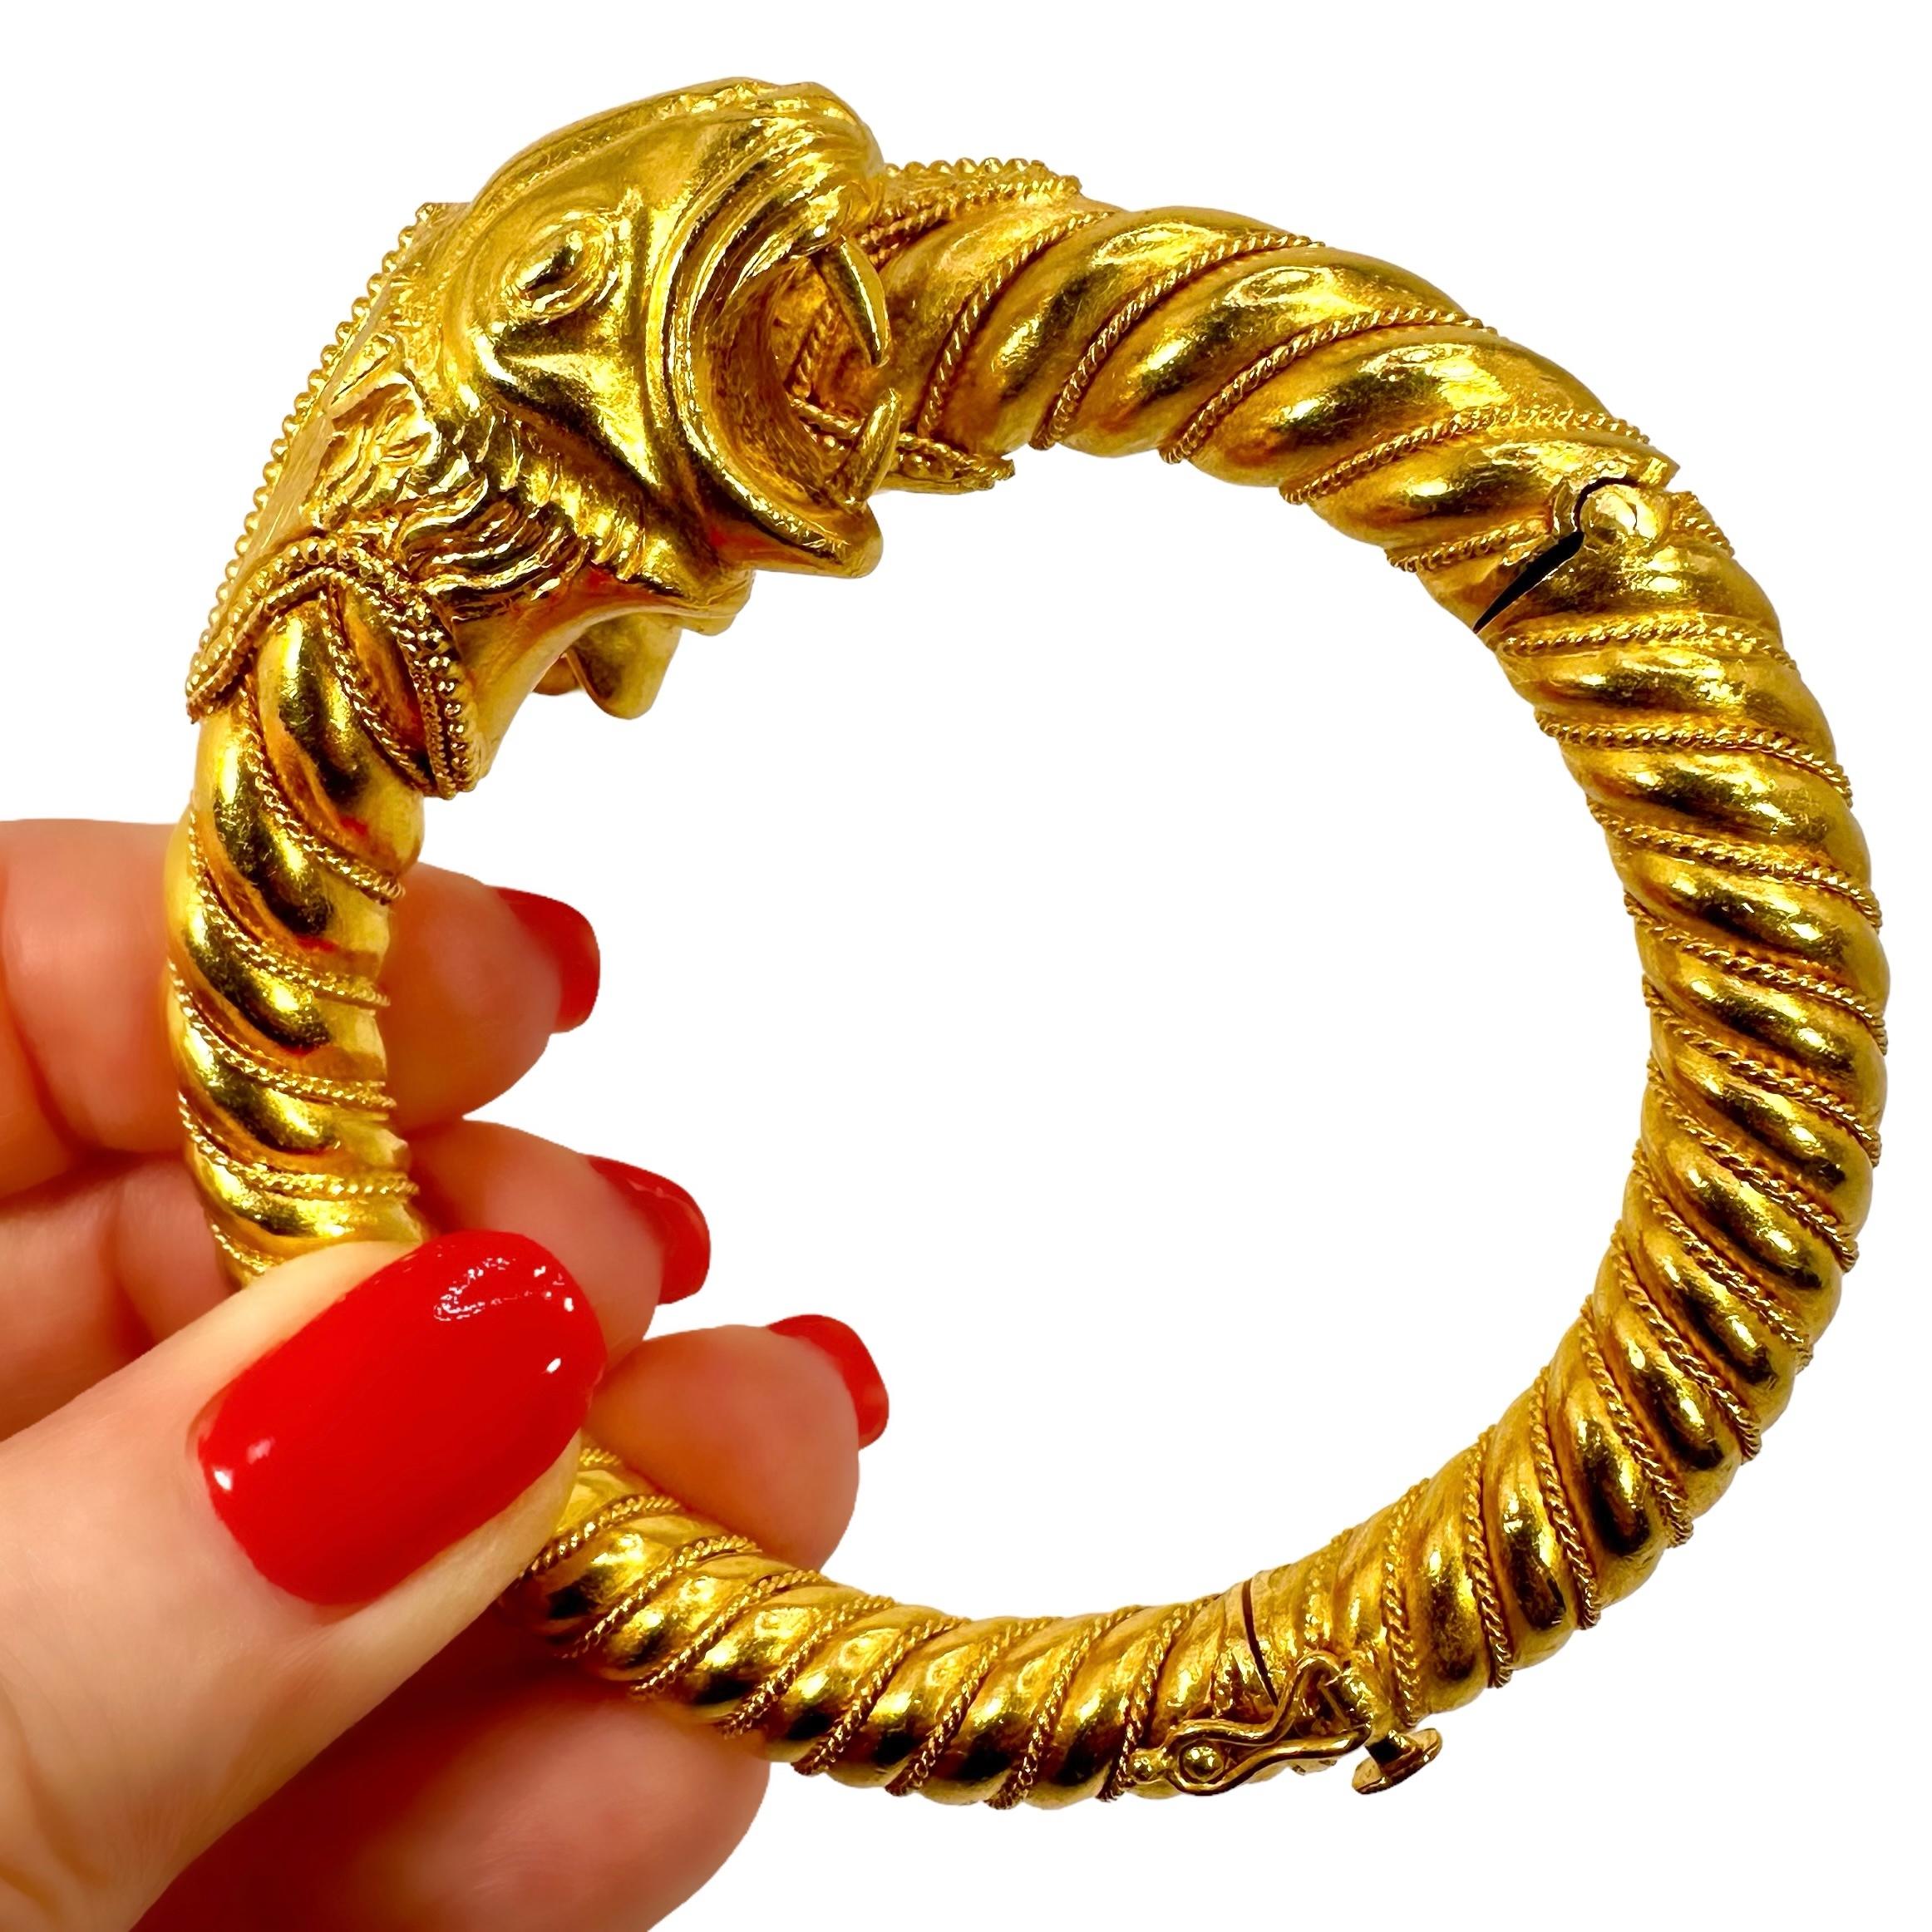 Double Headed Mythical Creature Bypass Cuff Bracelet in 22K Gold by Lalaounis  For Sale 10